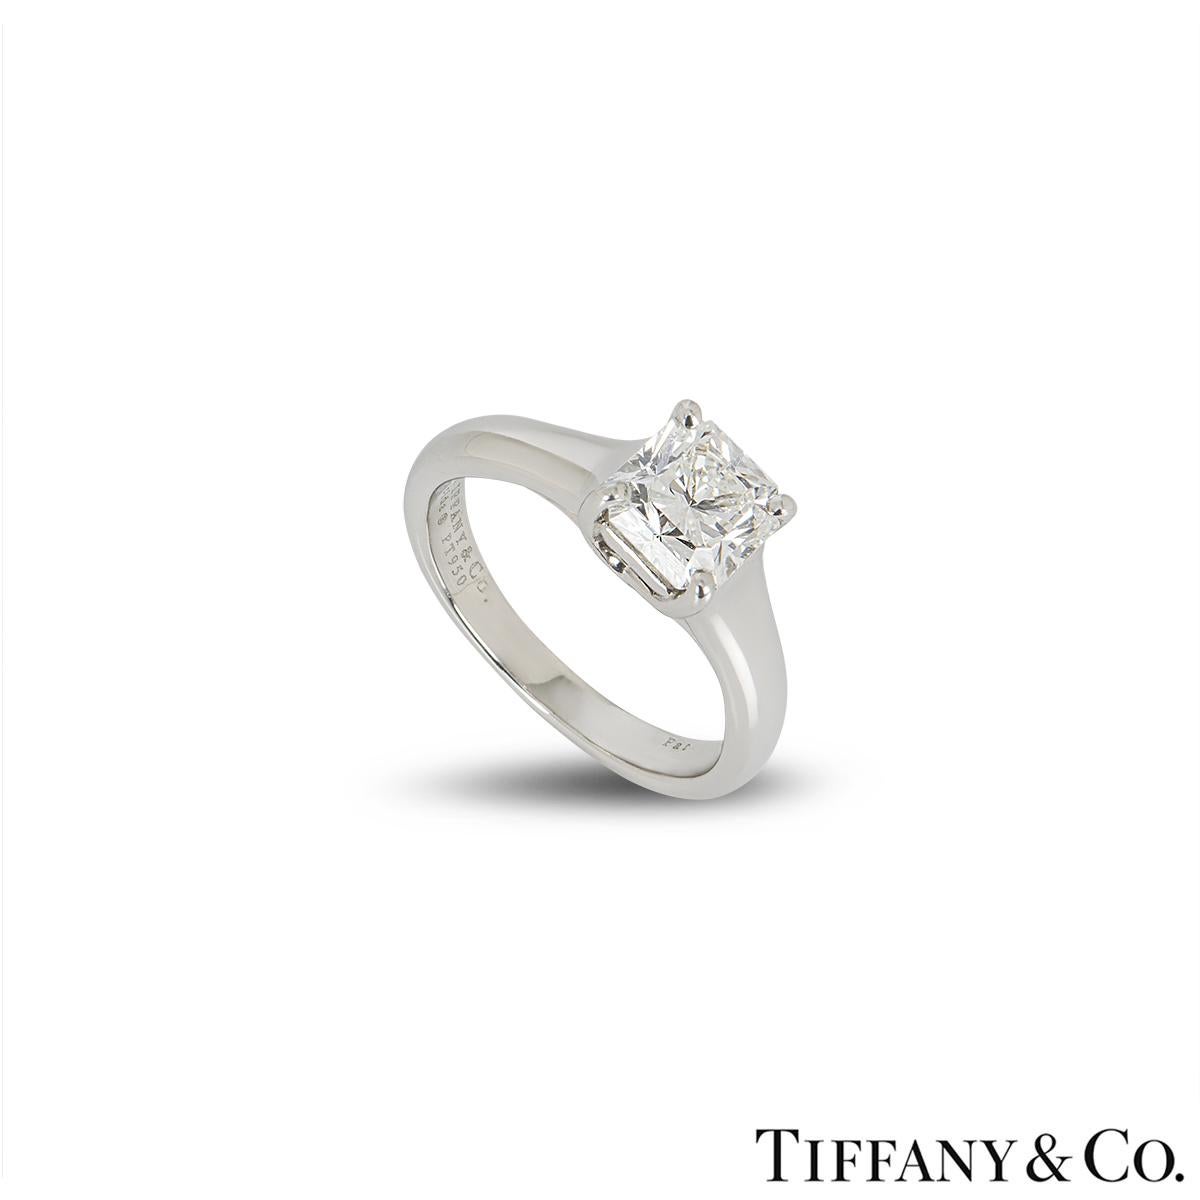 An alluring platinum Tiffany & Co. diamond ring from the Lucida collection. The ring comprises of a Lucida cut diamond in a 4 claw setting with a weight of 1.10ct, G colour and VVS1 clarity. The ring is a size UK I, EU 48.5 and US 4 1⁄4 but can be